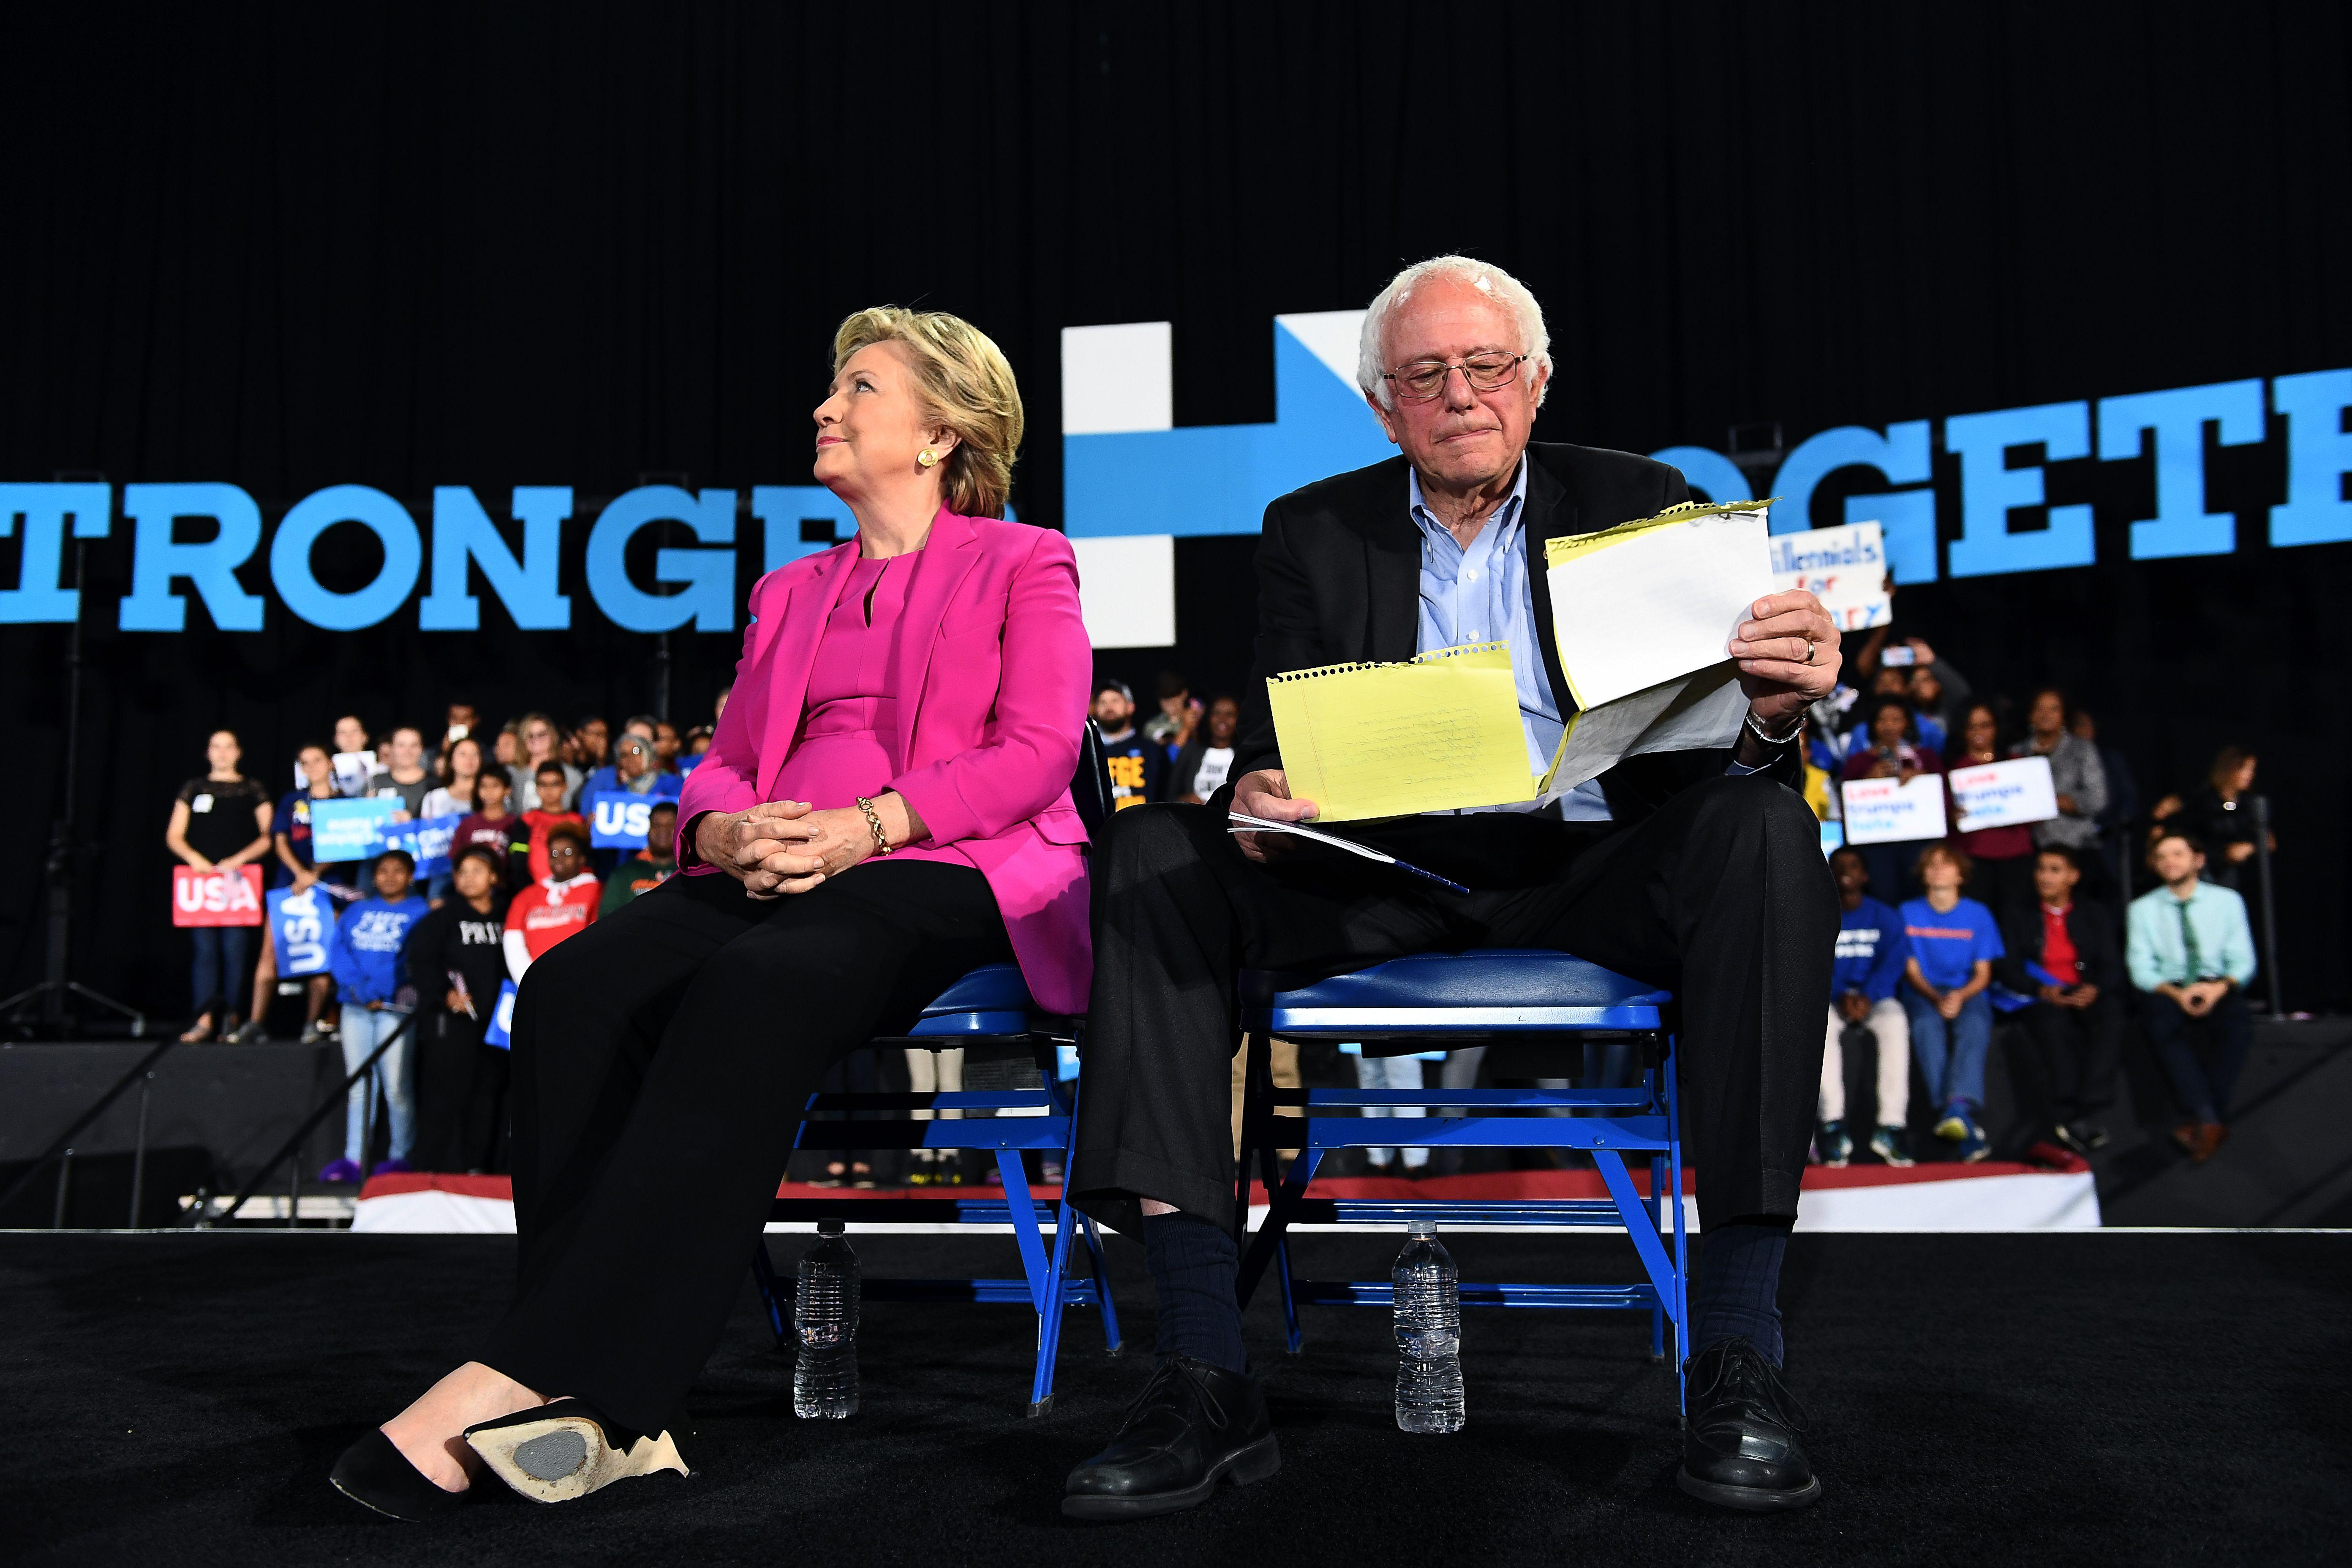 Hillary Clinton and Bernie Sanders sit on chairs looking away from one another during a campaign rally. Bernie is looking at sheets of notes.